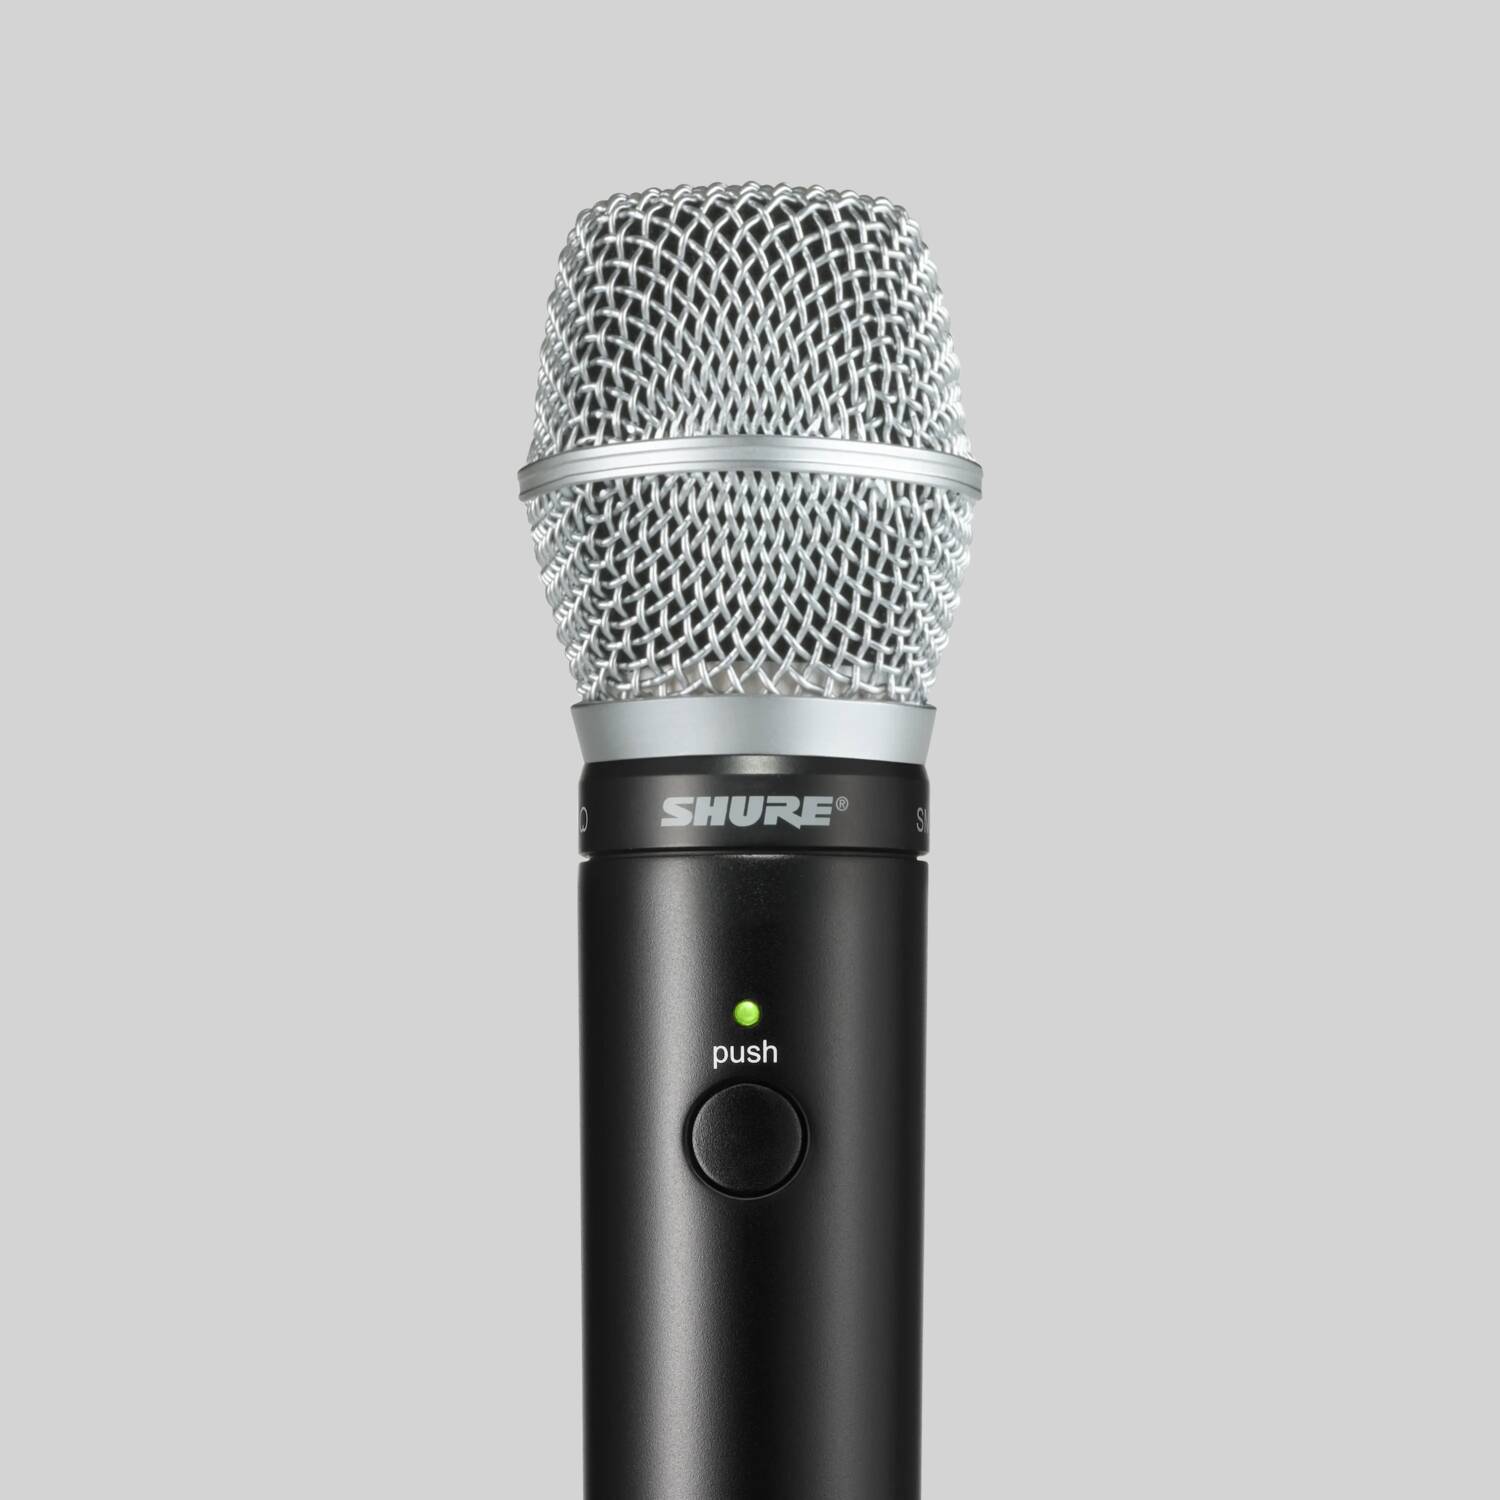 All-in-One, Job Done: MXW neXt 2 Delivers Convenient Wireless Audio - Shure  USA